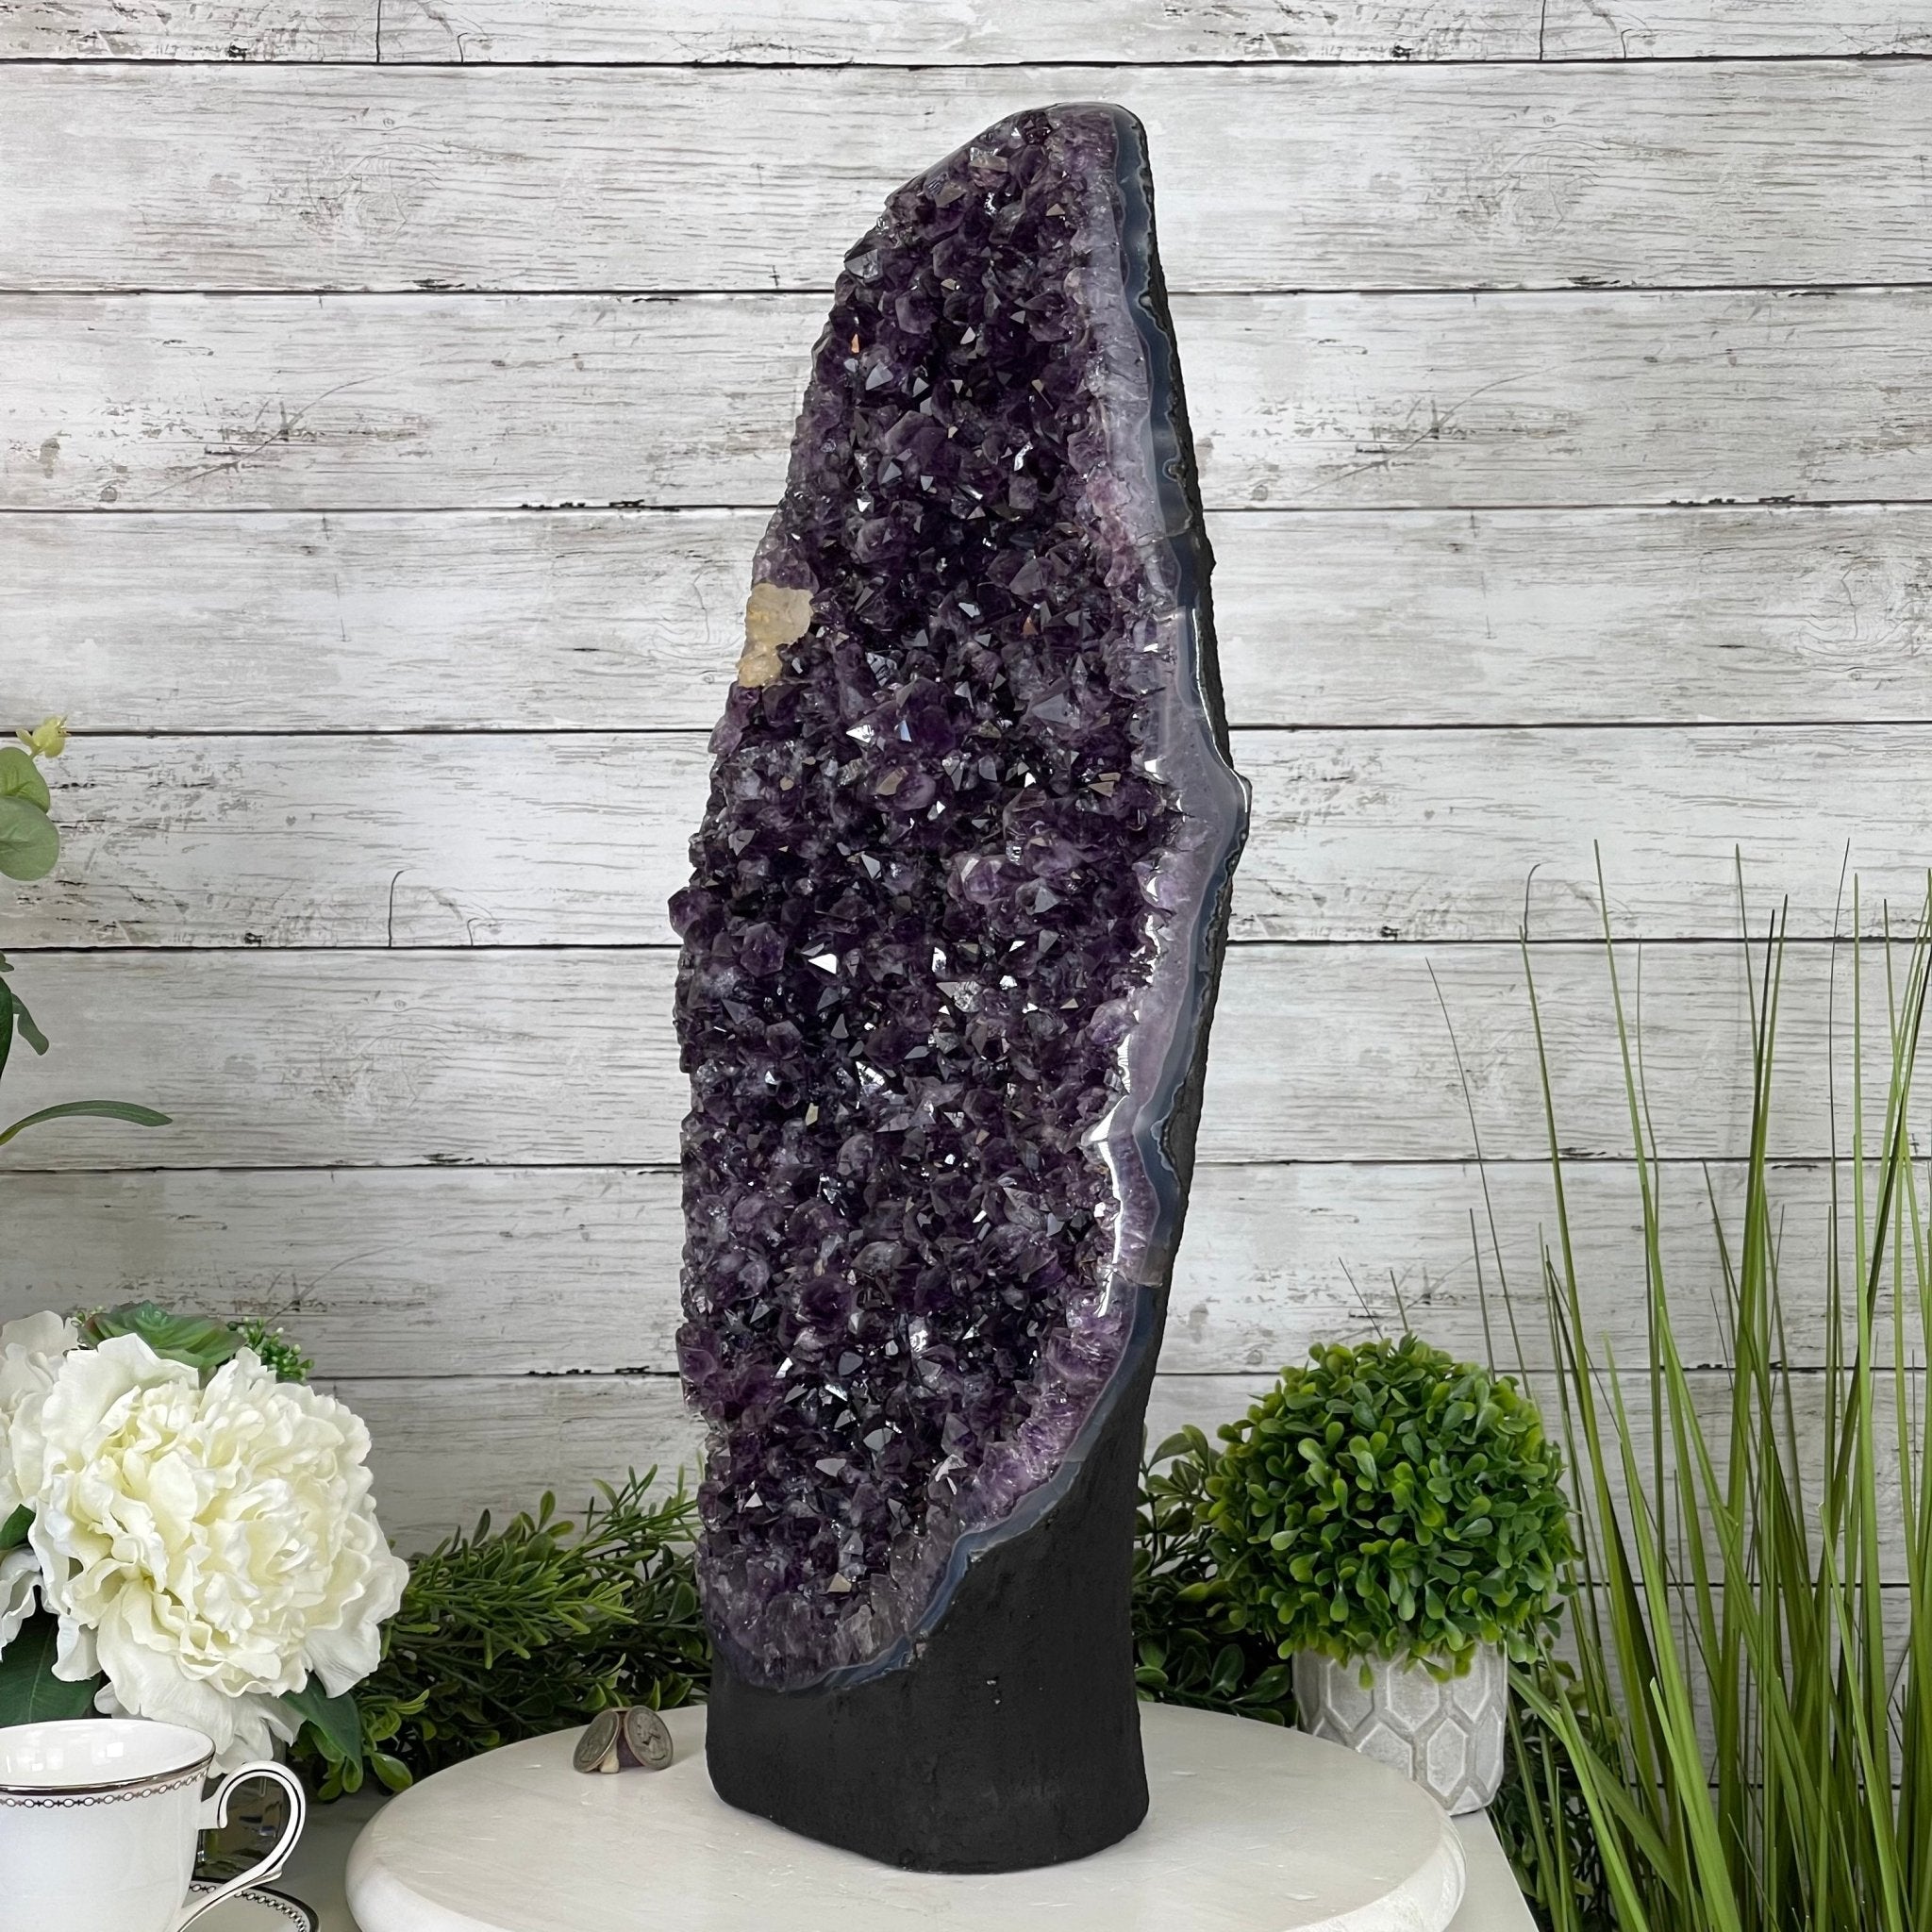 Extra Quality Amethyst Druse Cluster on Cement Base, 38.4 lbs and 23" Tall #5614-0053 - Brazil GemsBrazil GemsExtra Quality Amethyst Druse Cluster on Cement Base, 38.4 lbs and 23" Tall #5614-0053Clusters on Cement Bases5614-0053